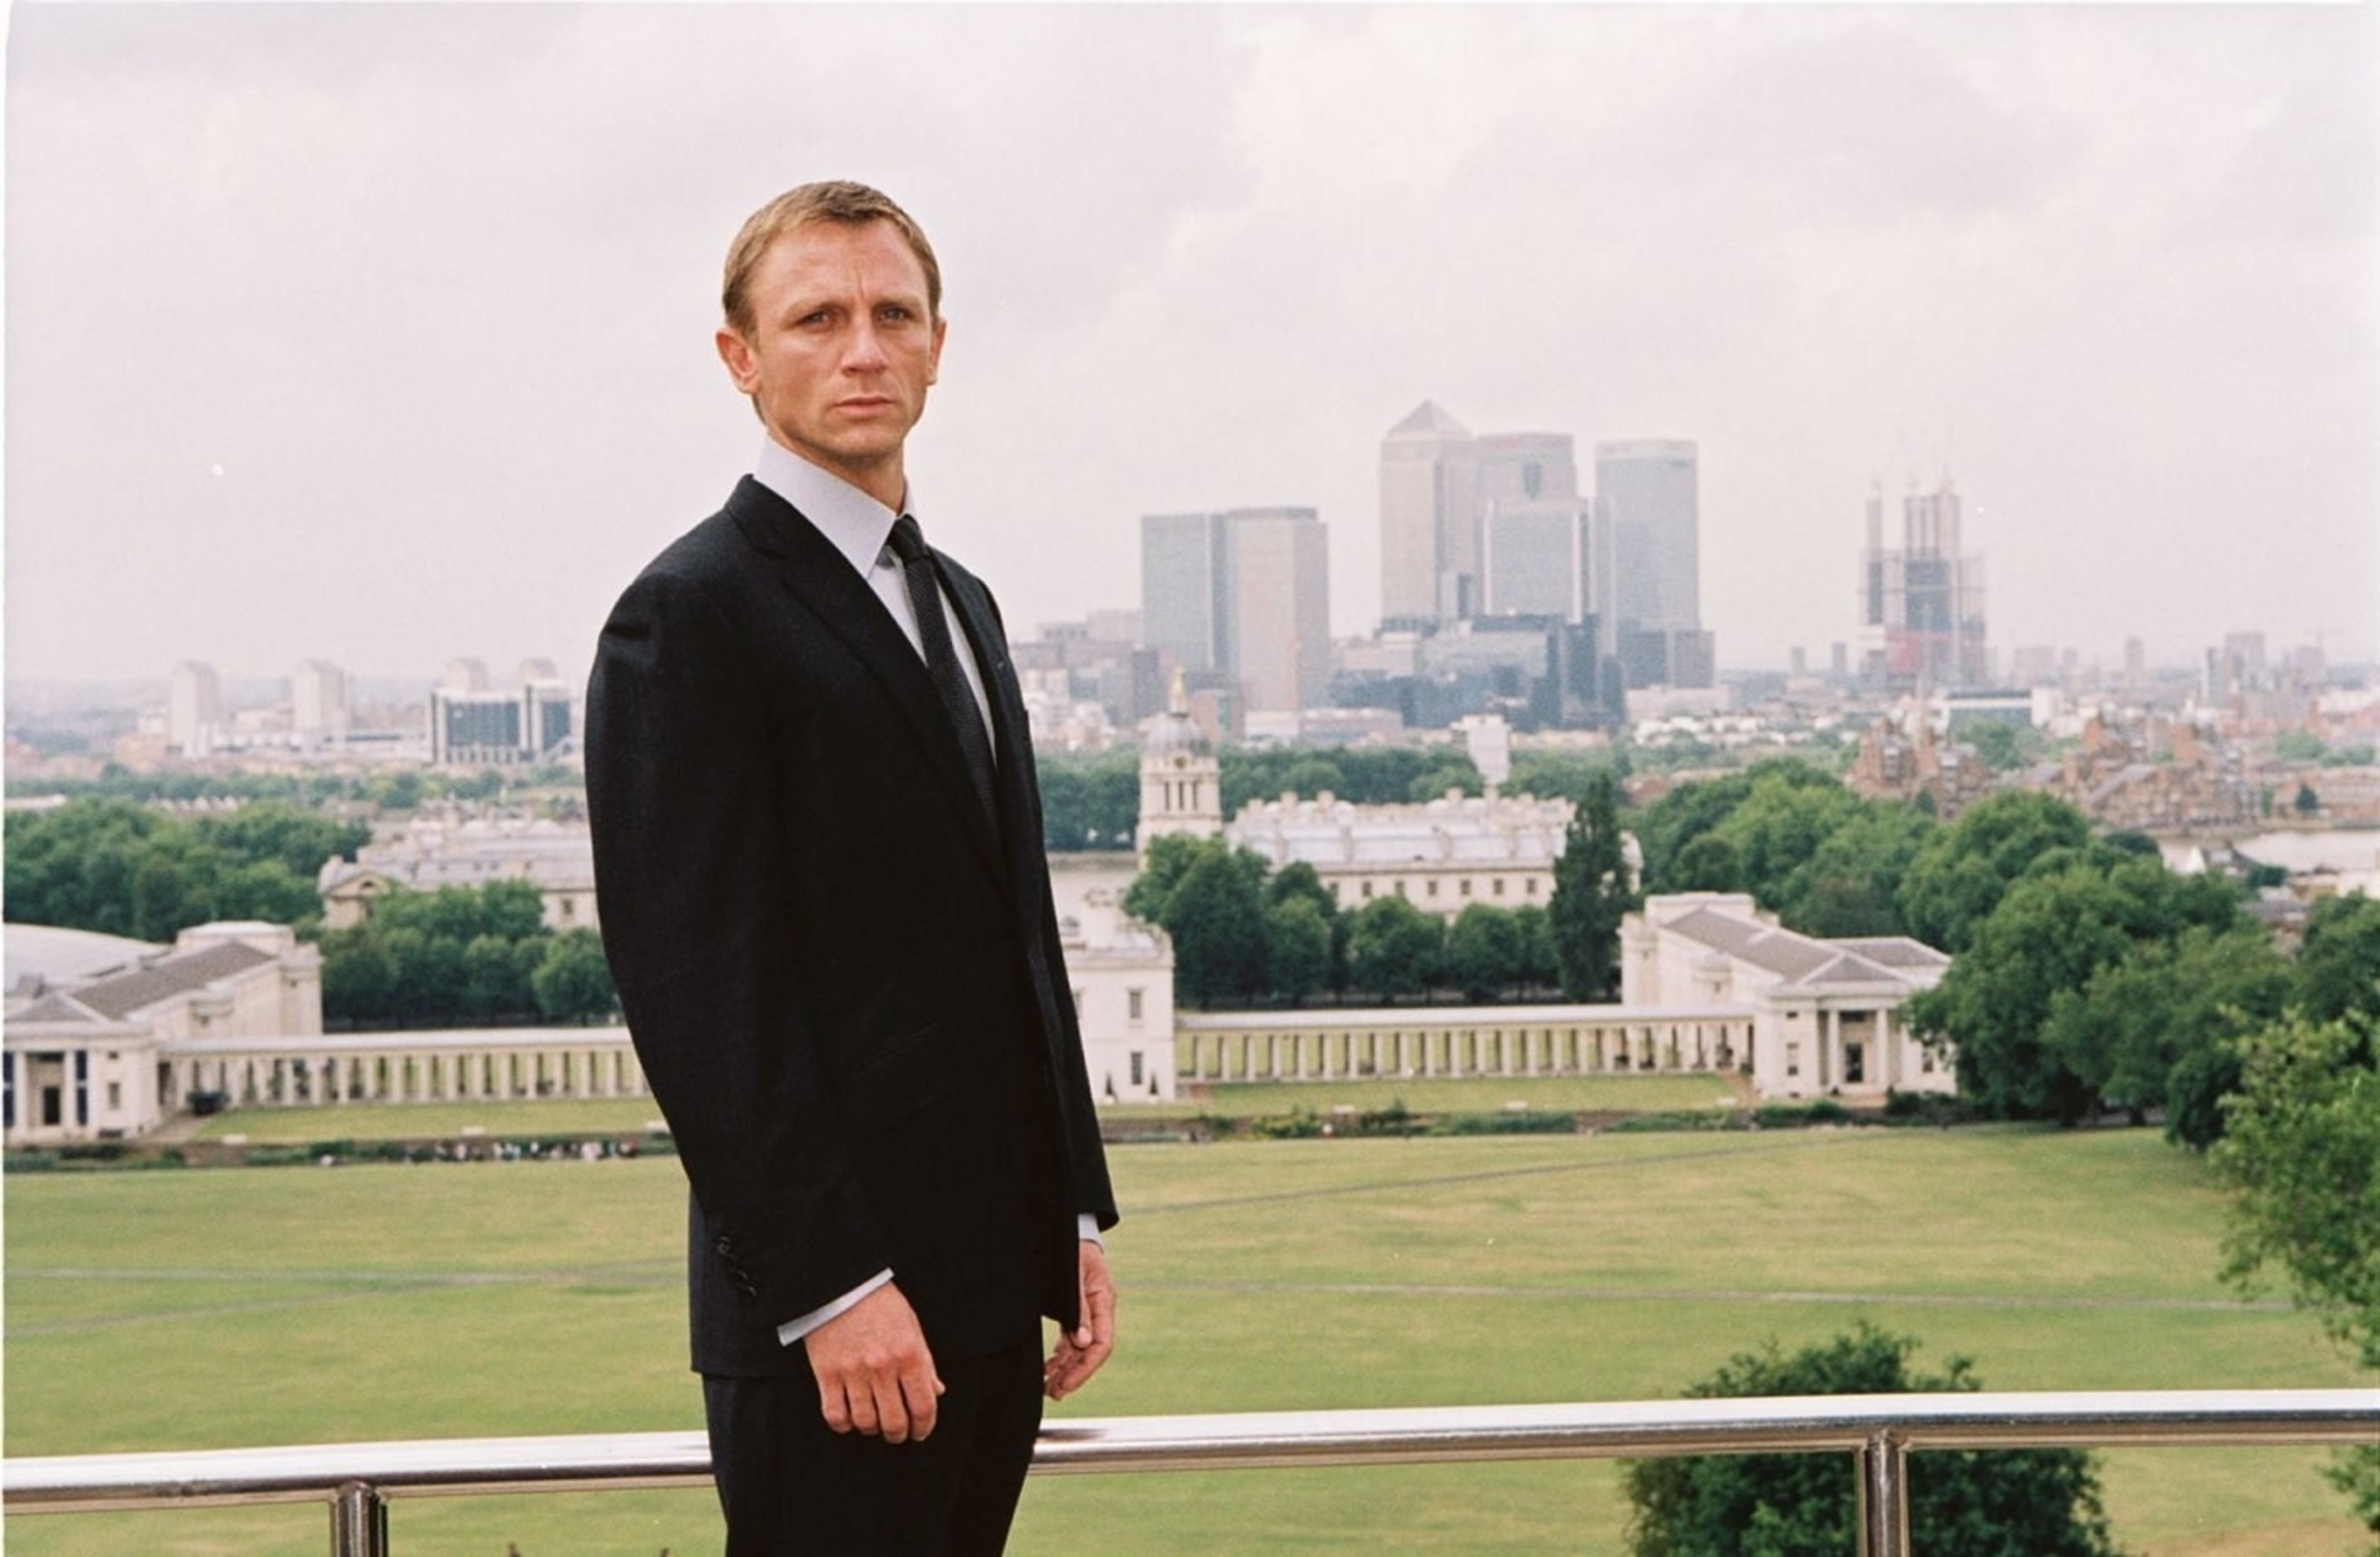 <p>This is another London crime film, but it ramps up the sheen and budget. The unnamed protagonist, played by Daniel Craig, is more of a medium-time criminal, but he’s still in over his head. The movie is slicker than <em>Lock, Stock</em>, but it’s considered responsible for getting Craig the role of Bond.</p><p><a href='https://www.msn.com/en-us/community/channel/vid-cj9pqbr0vn9in2b6ddcd8sfgpfq6x6utp44fssrv6mc2gtybw0us'>Follow us on MSN to see more of our exclusive entertainment content.</a></p>